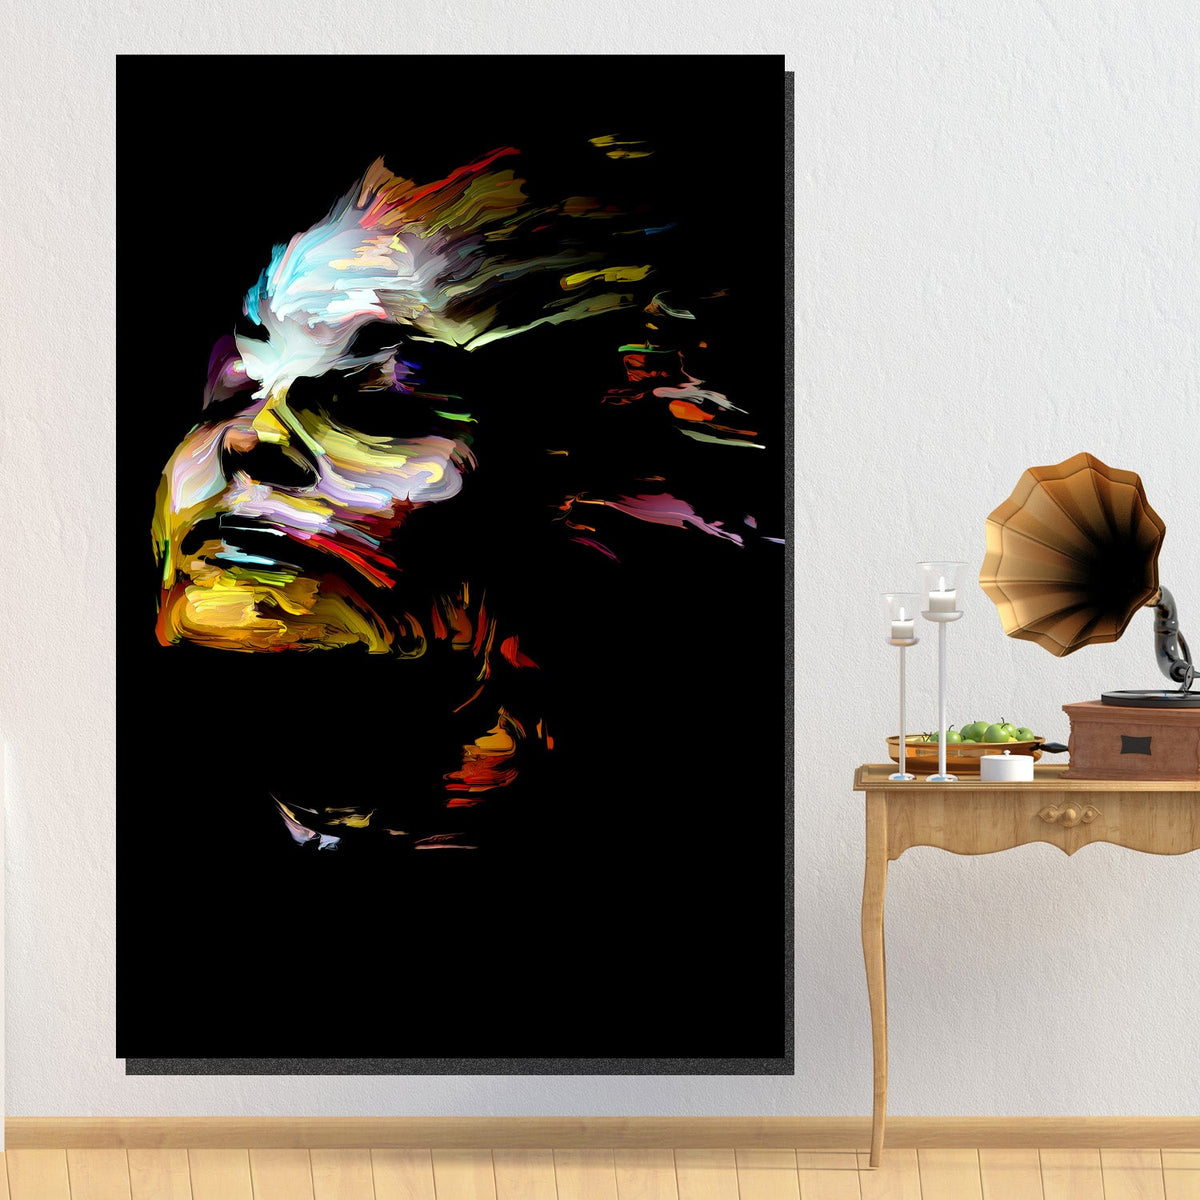 https://cdn.shopify.com/s/files/1/0387/9986/8044/products/FreedomCanvasArtprintStretched-2.jpg